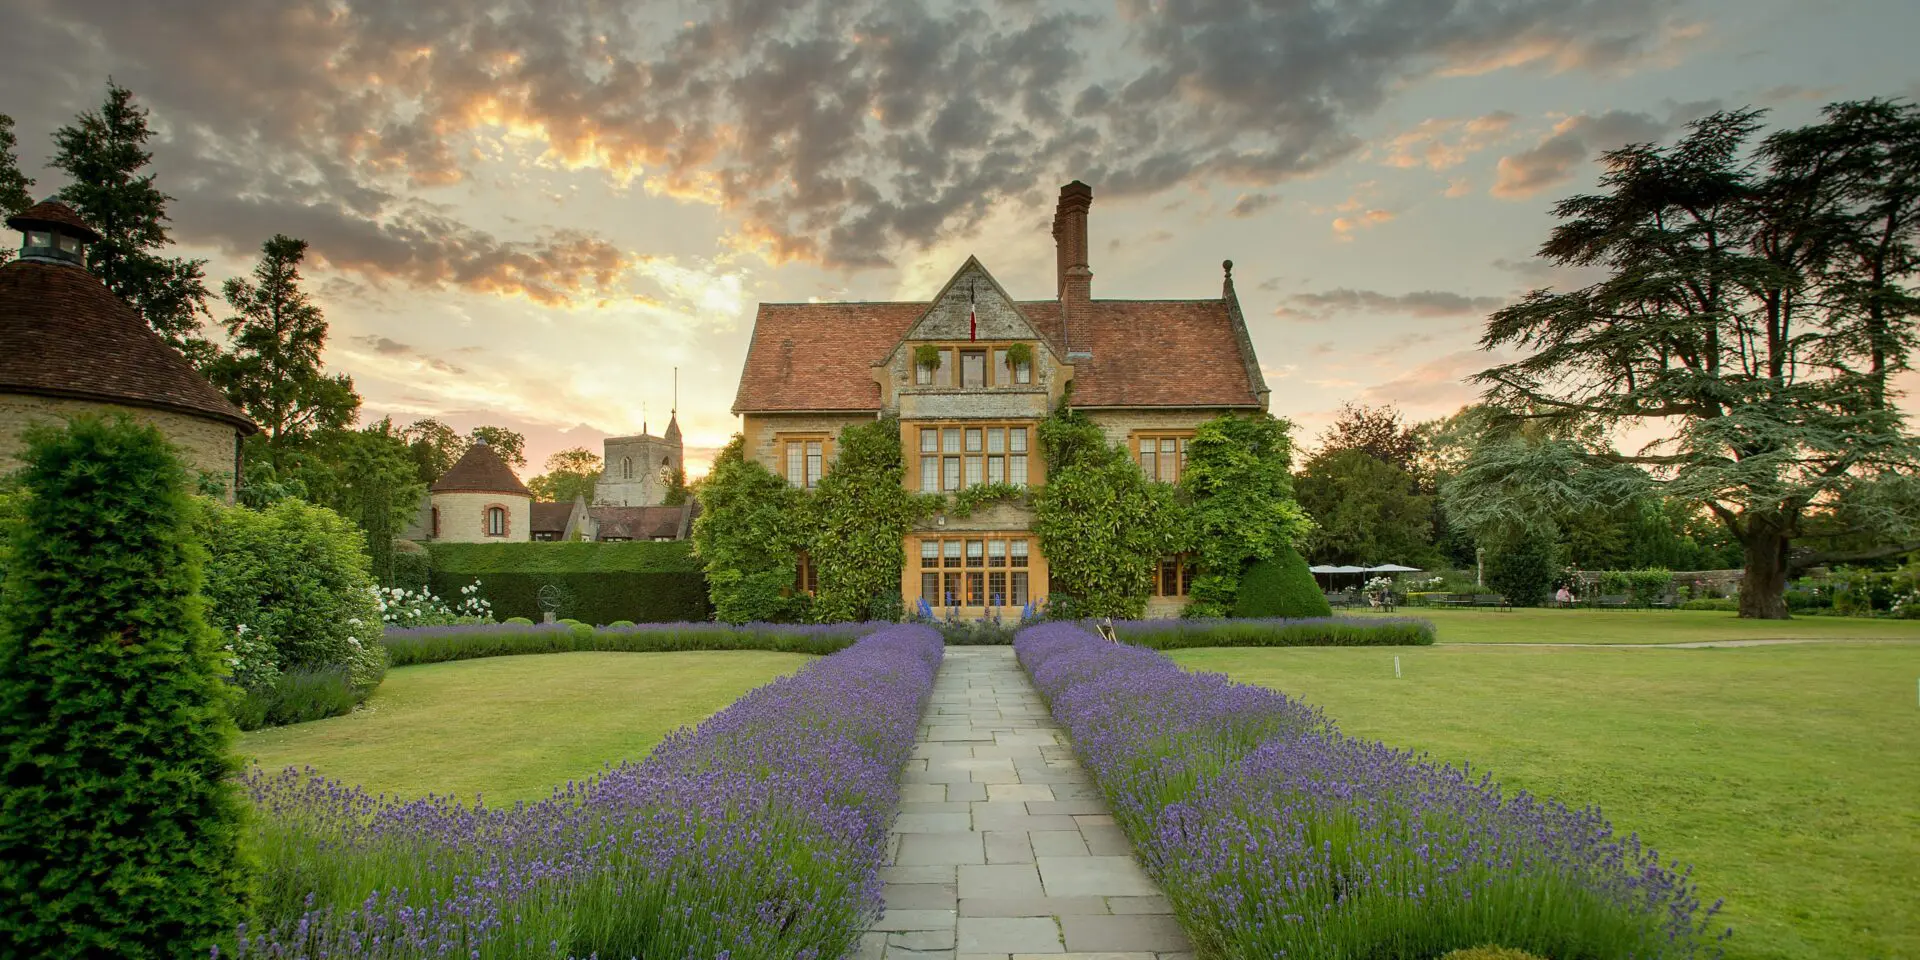 Le Manoir restaurant during the day time, a pathway leading up to the building with lavendar surrounding the path